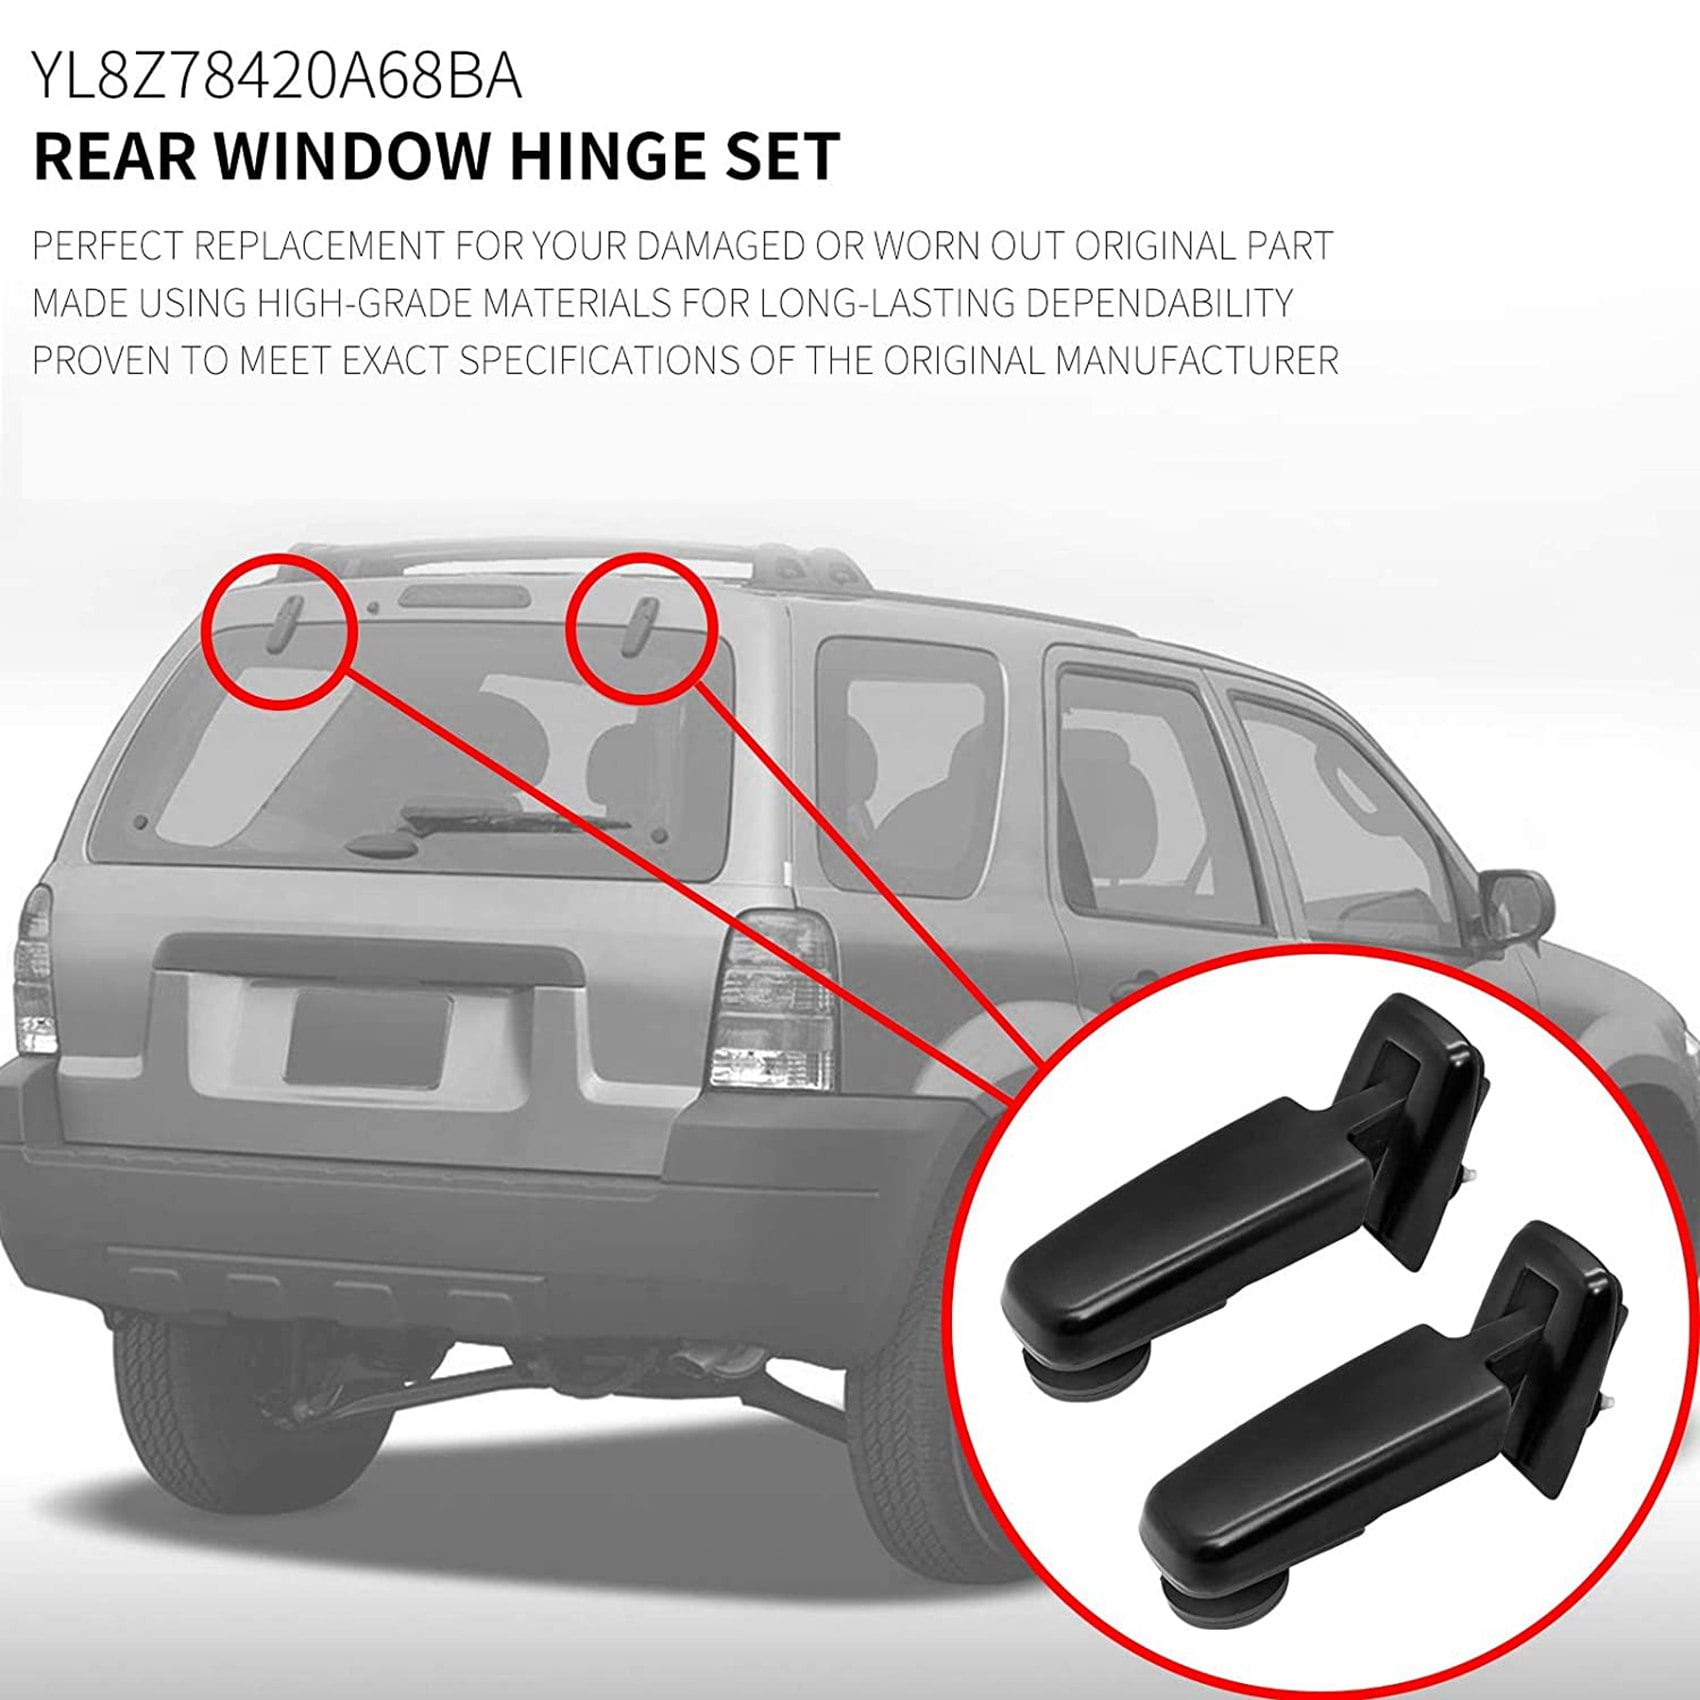 Hood Hinge Compatible with 2001-2007 Ford Escape Driver and Passenger Side 